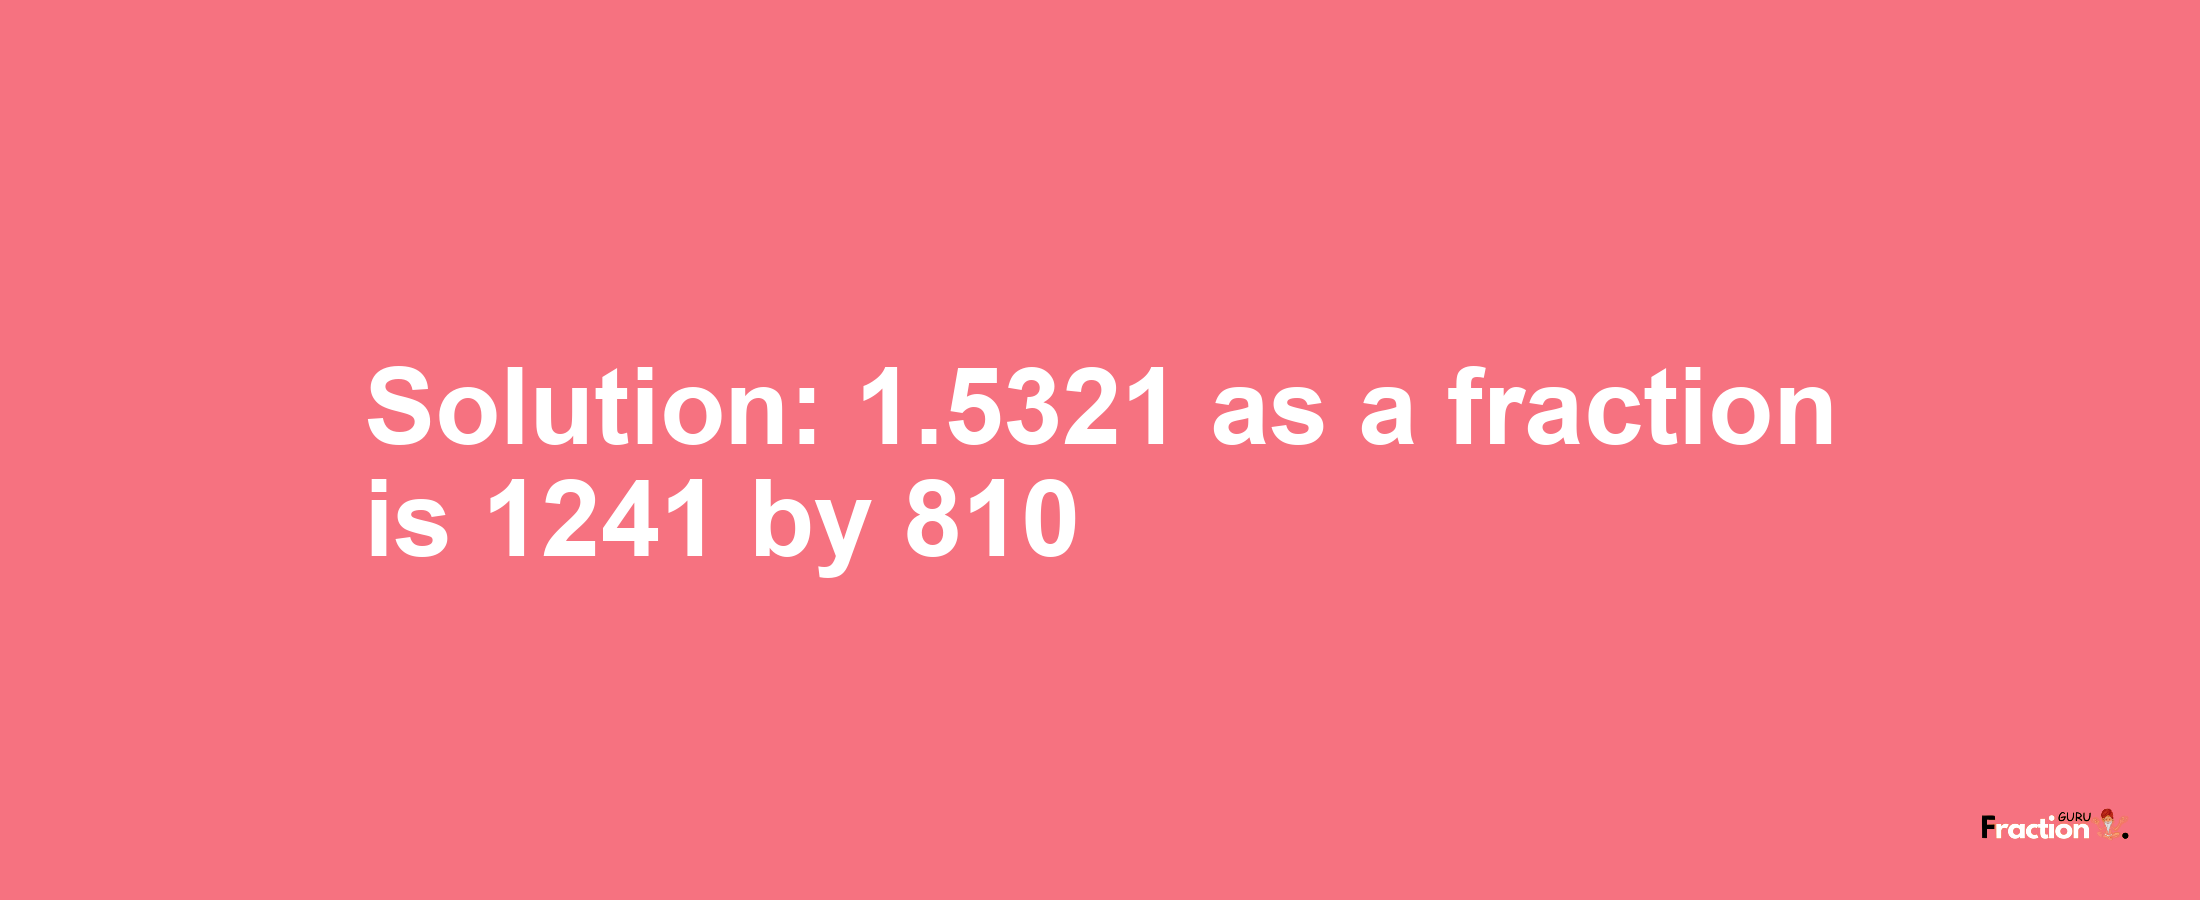 Solution:1.5321 as a fraction is 1241/810